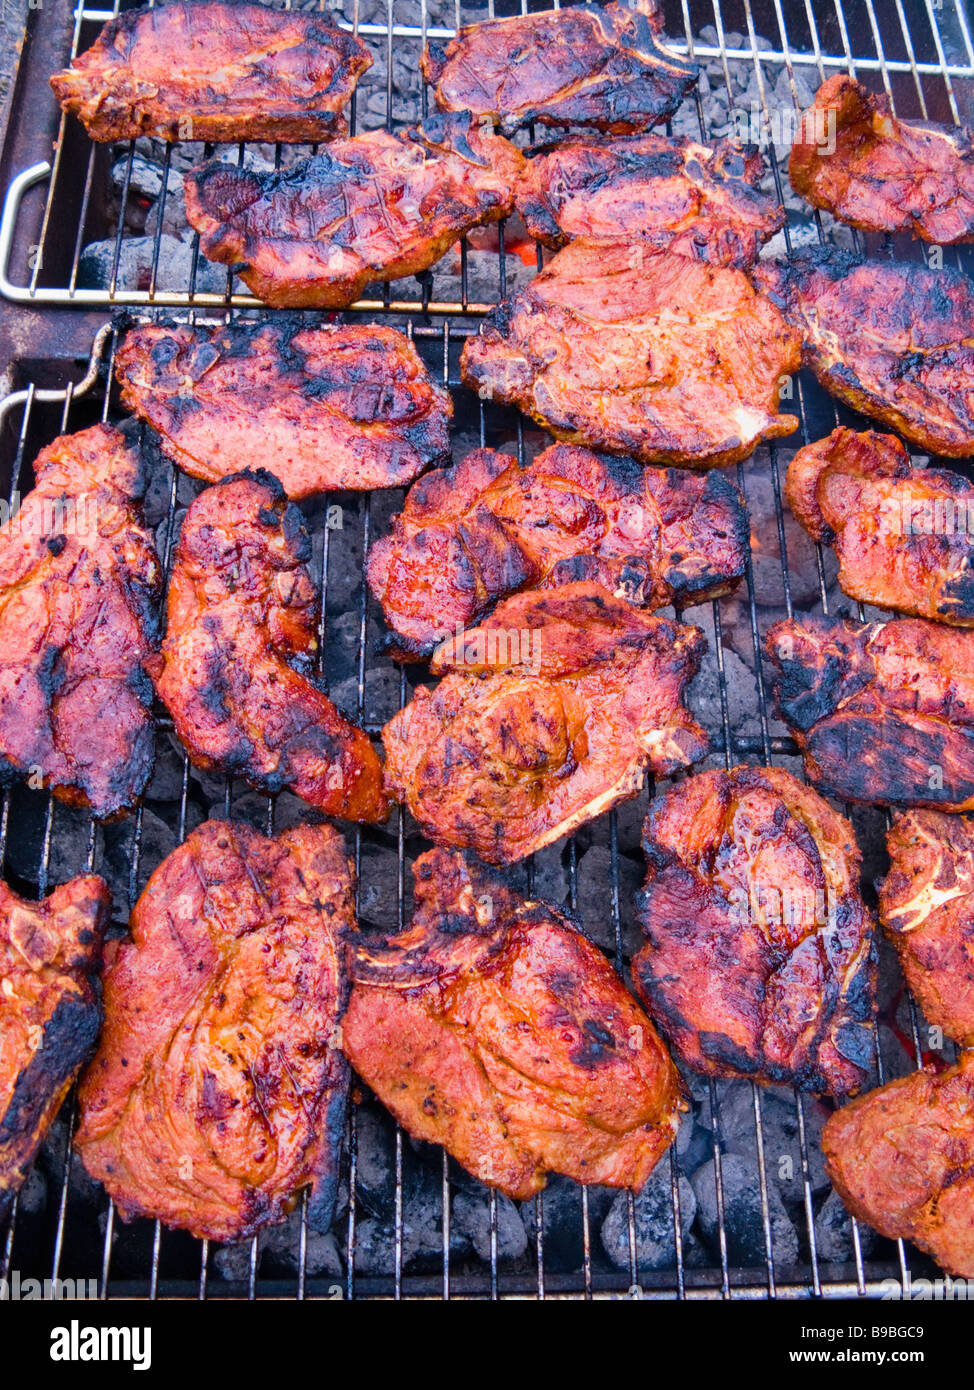 Grilled meat on the grill Stock Photo